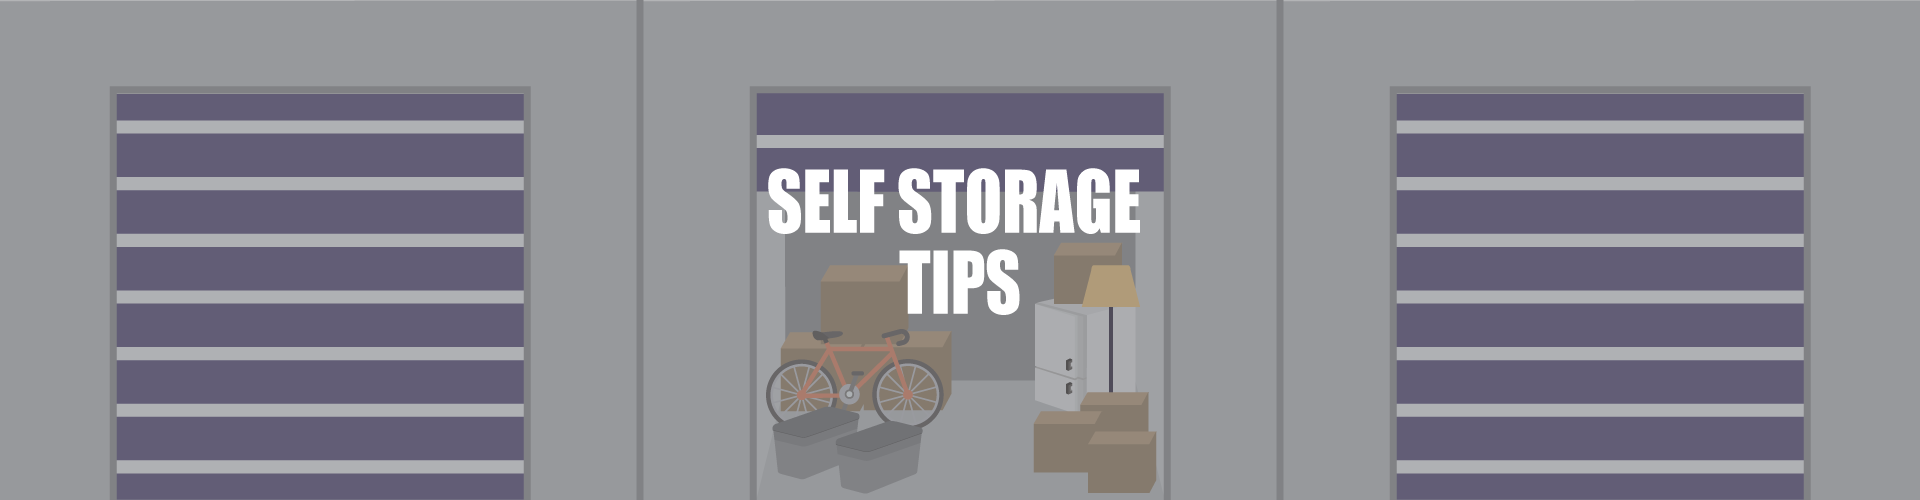 Self Storage Tips feature image